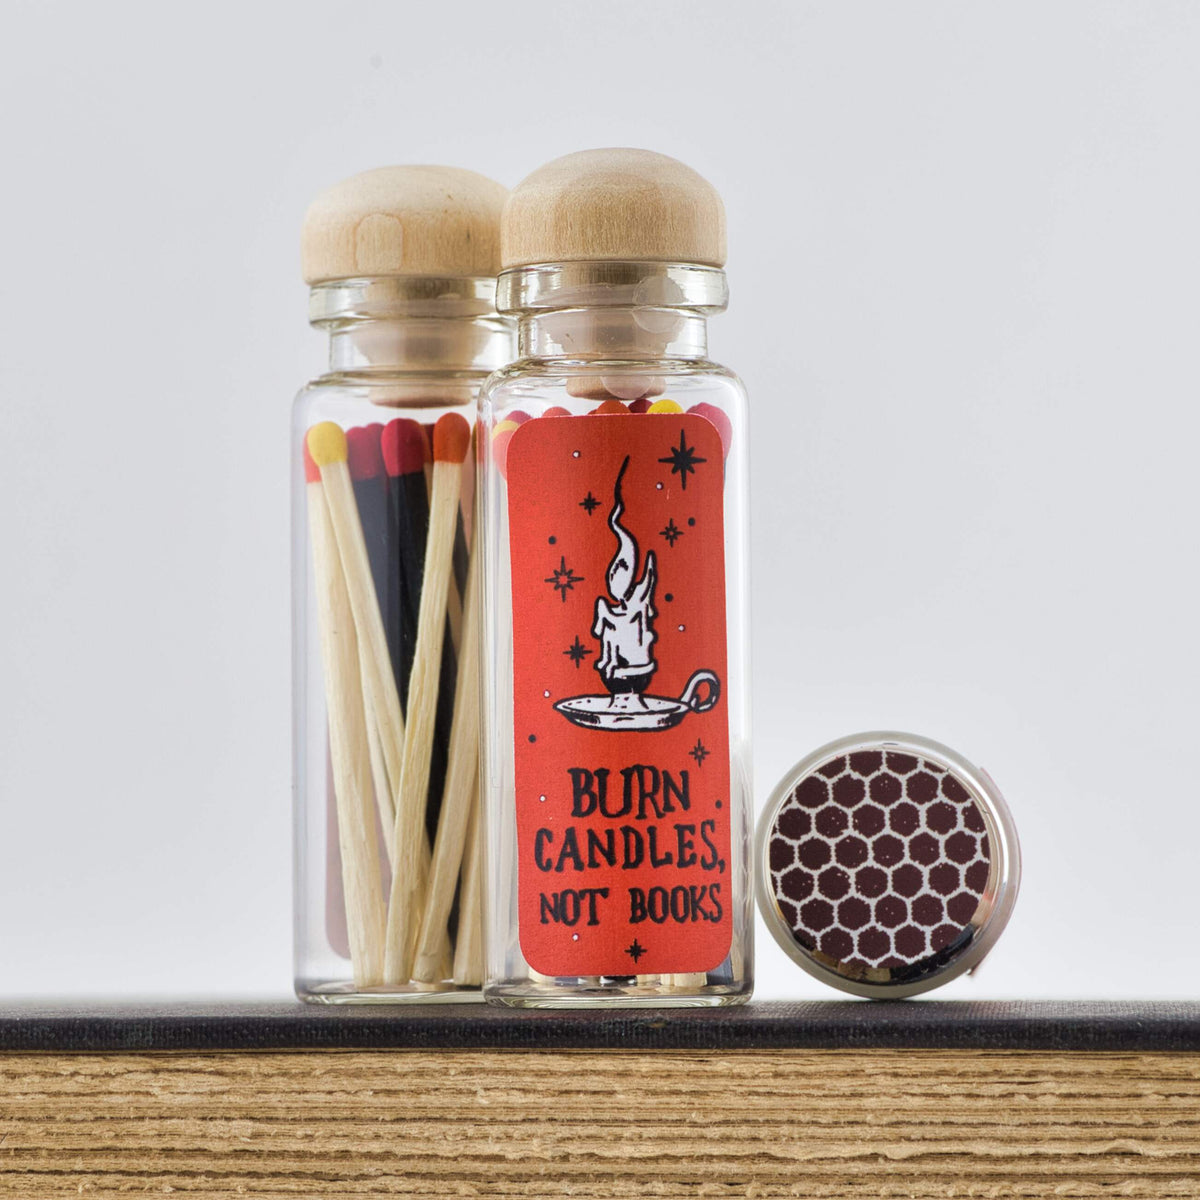 Wooden Matchsticks in Glass Bottle- White Tips by Abboo Candle Co